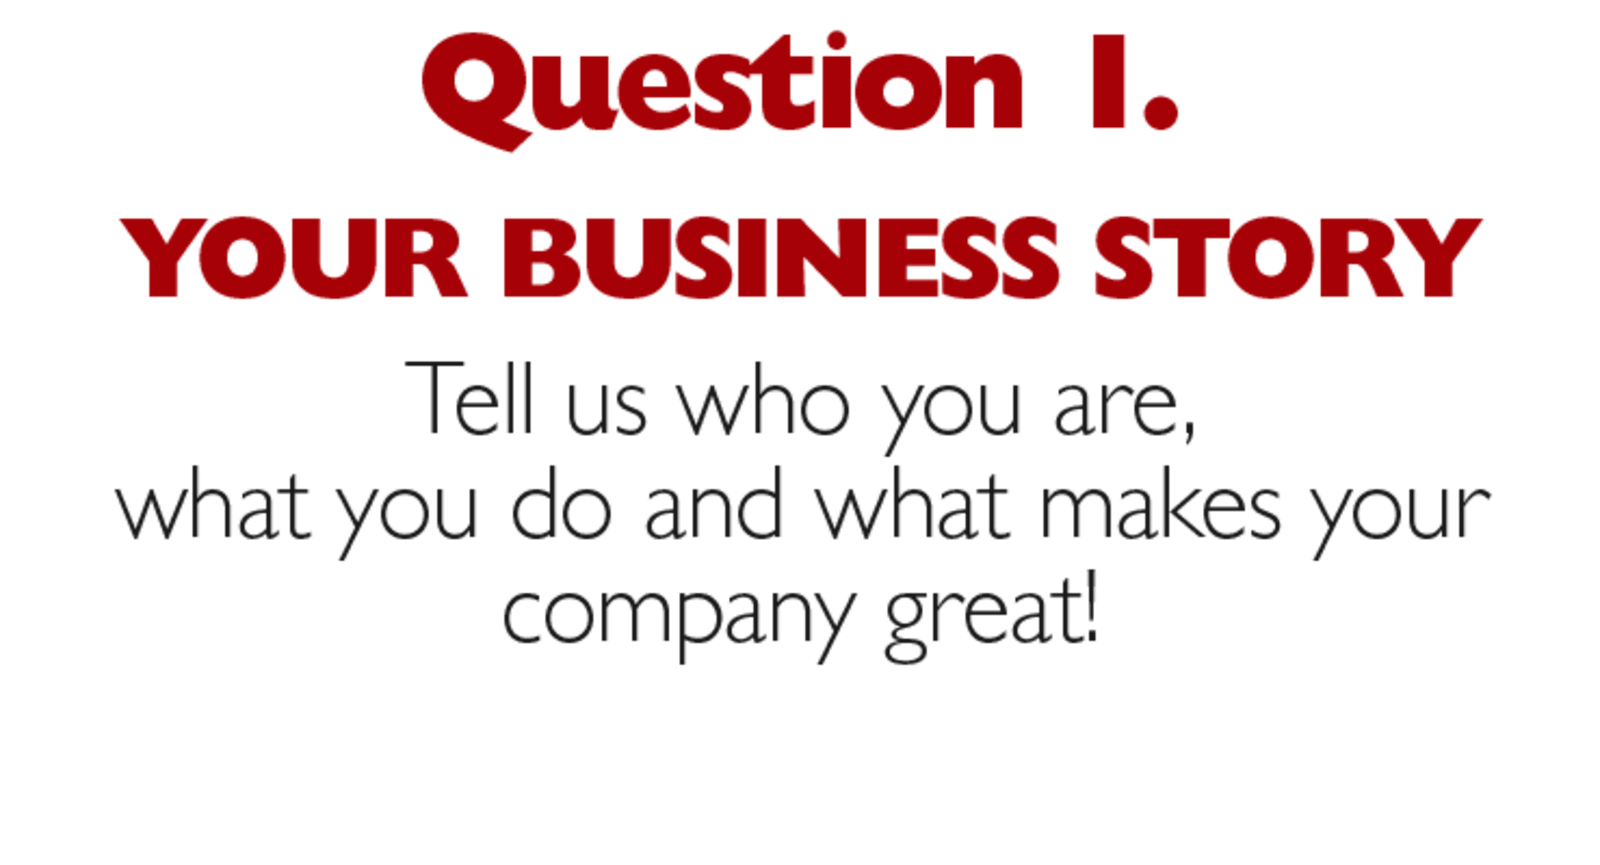 Question 1. Your business story. Tell us who you are, what you do and what makes your company great!